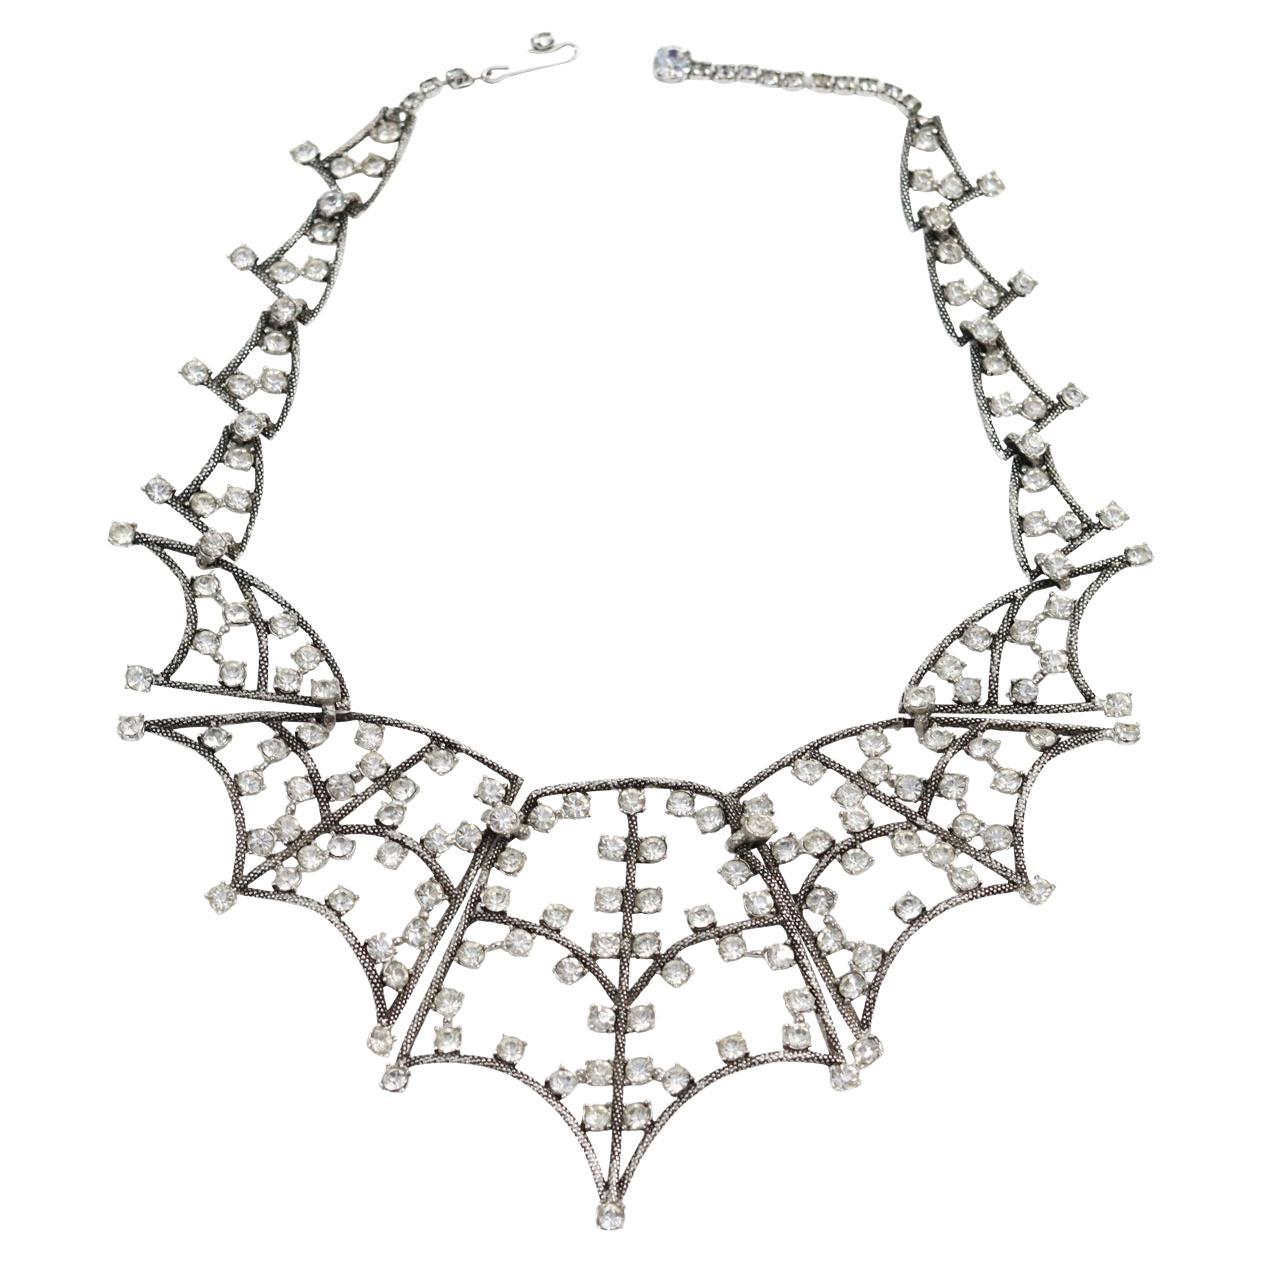 Collectible Schiaparelli Silver Tone Diamante Spider Necklace Circa 2013s. This spectacular Schiaparelli choker necklace is in a spider web design and is so special and so different. The pieces are graduated in size so the biggest piece is in the